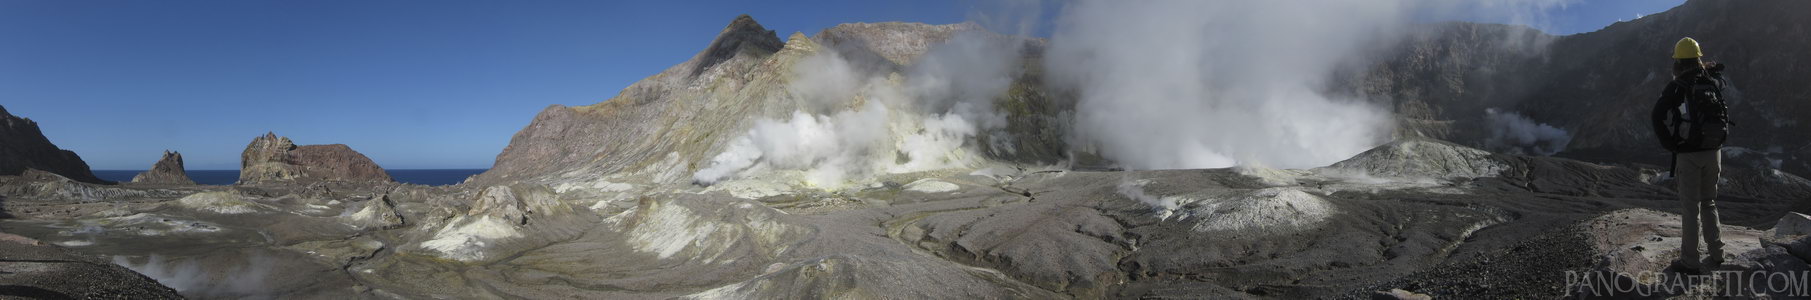 Sulfur Smoke - Smoke fills the air in every direction.